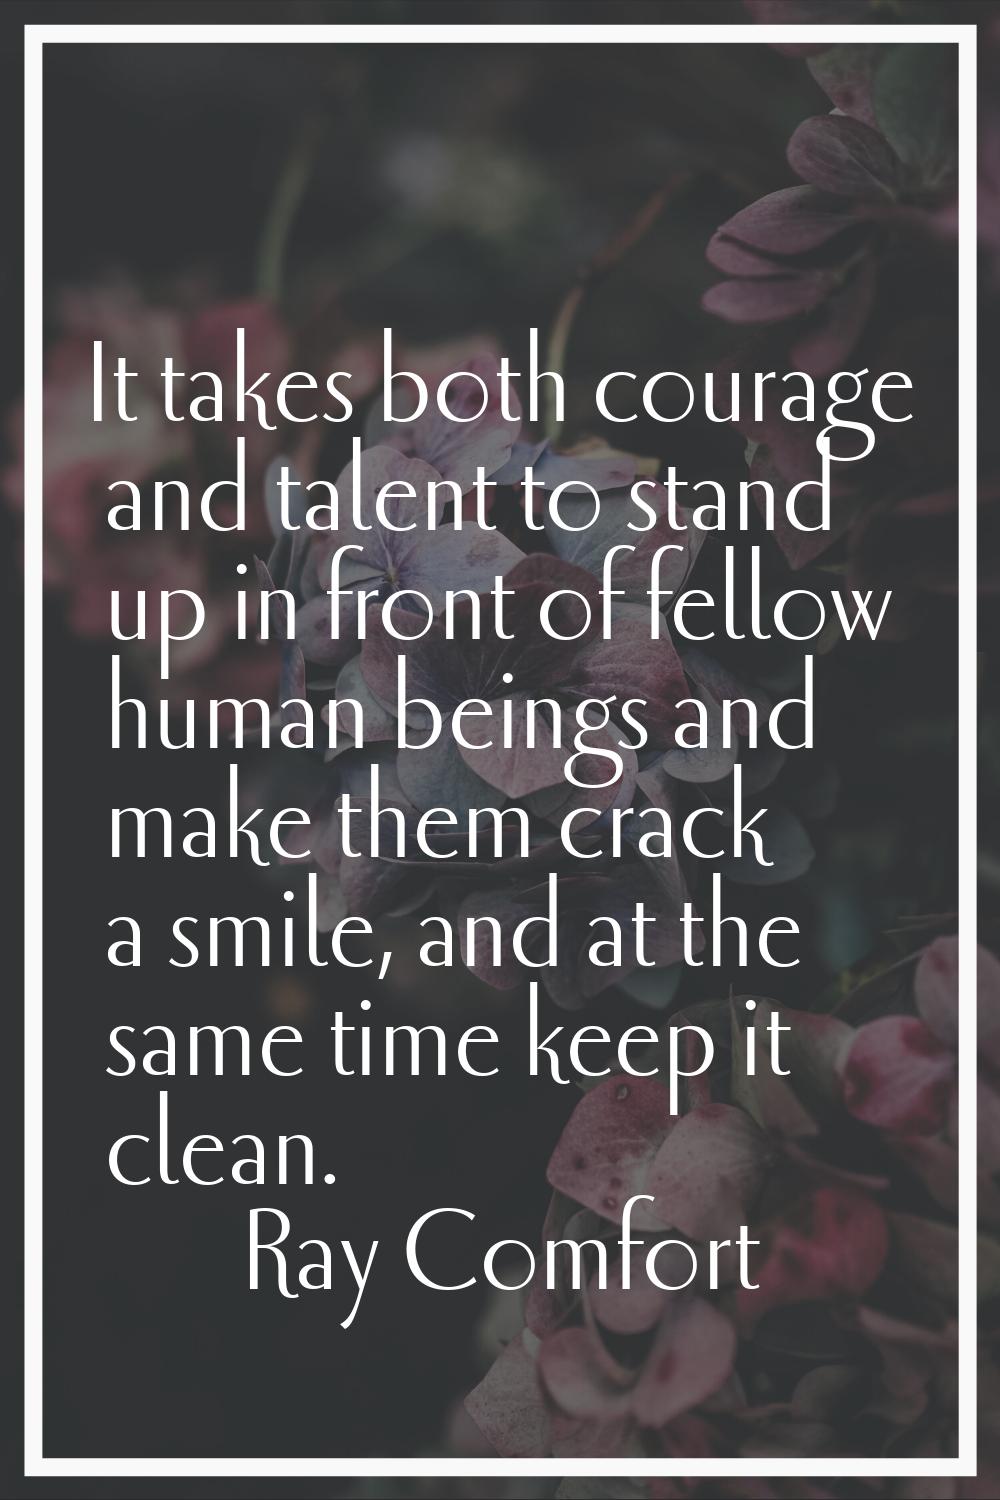 It takes both courage and talent to stand up in front of fellow human beings and make them crack a 